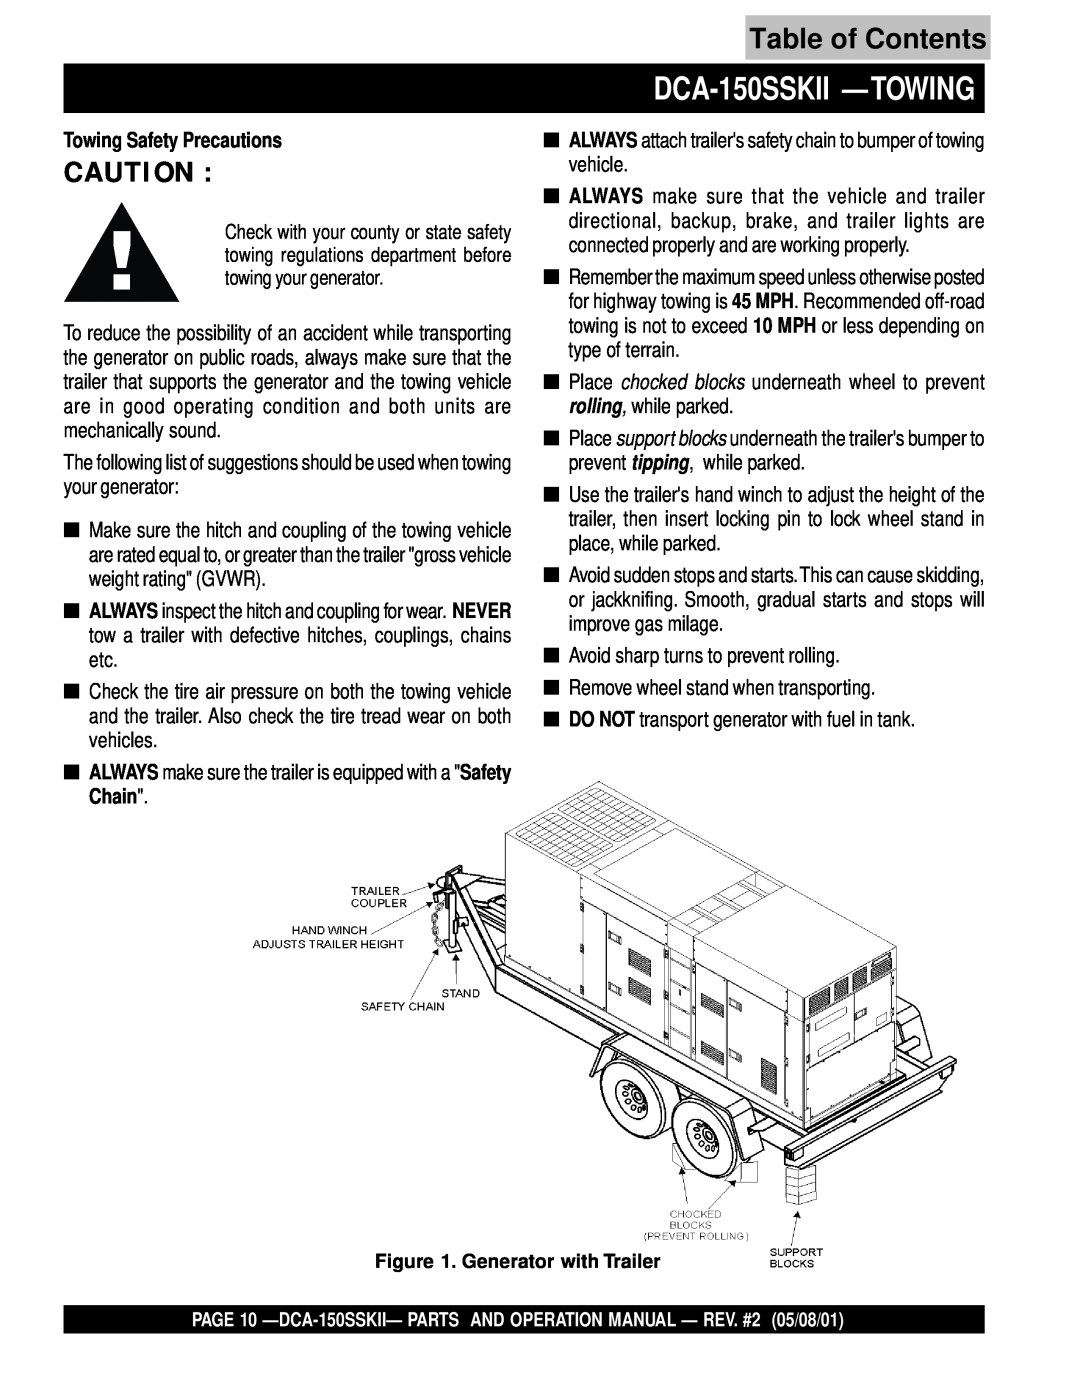 Multiquip operation manual DCA-150SSKII - TOWING, Towing Safety Precautions, Table of Contents 